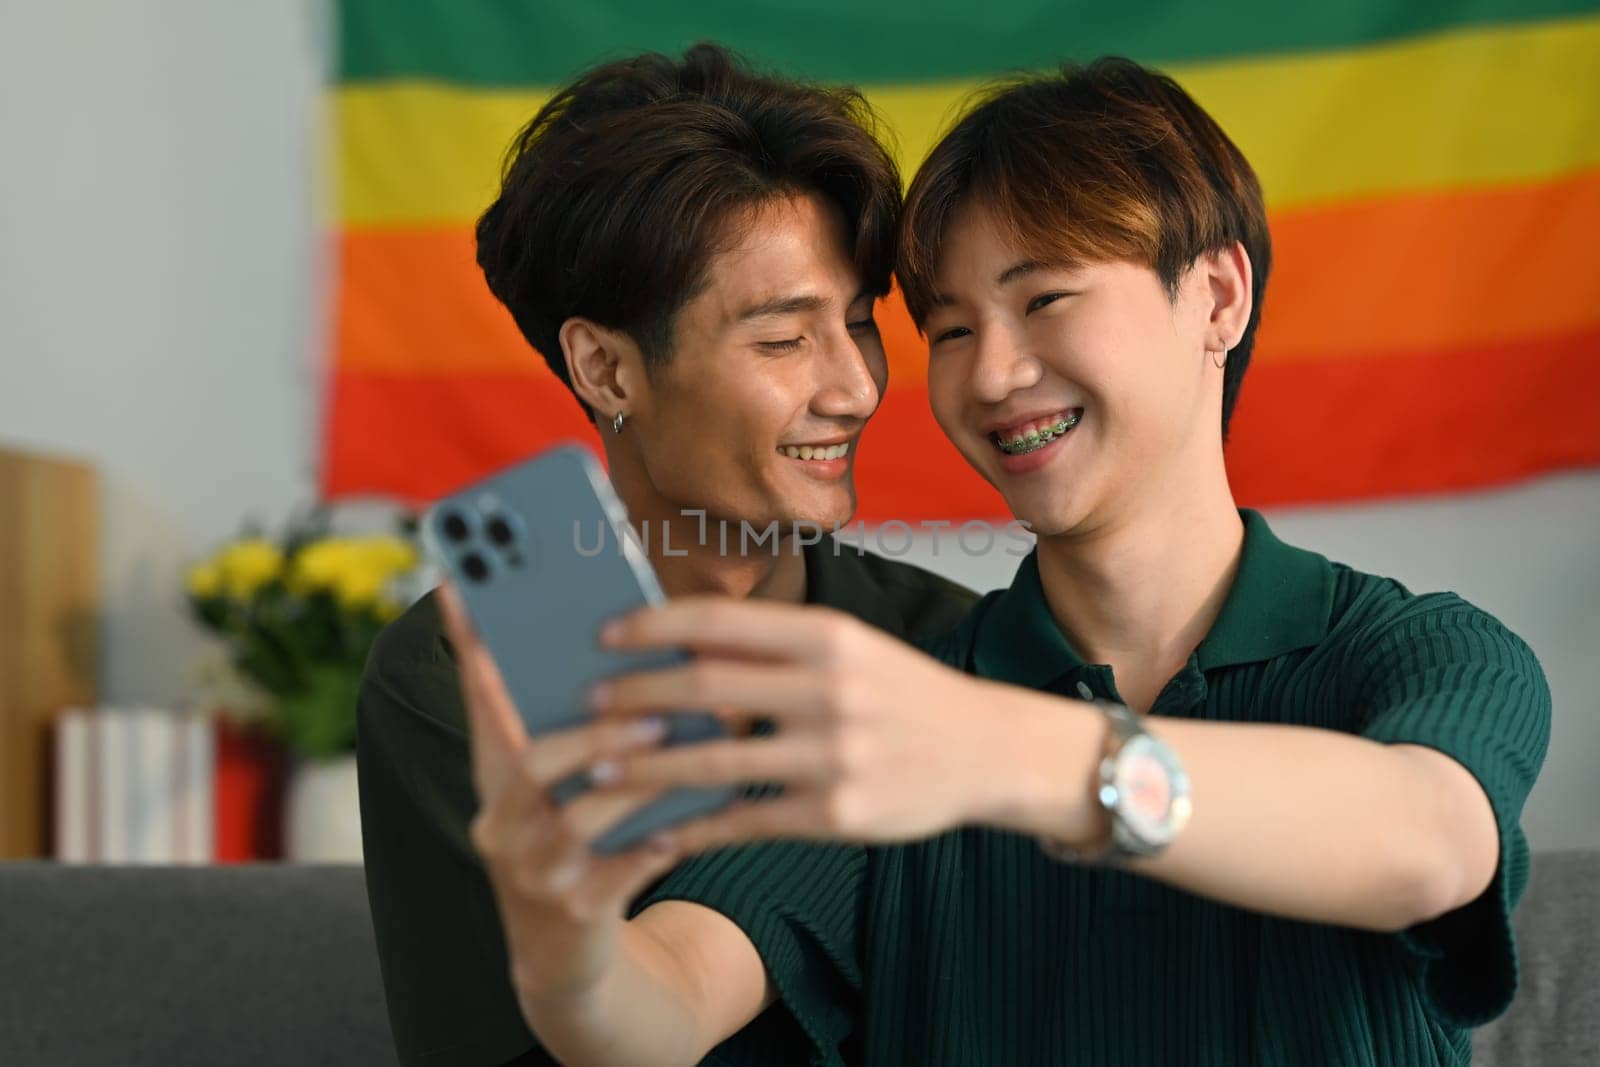 Romantic young gay couple taking a selfie with smartphone in living room rainbow flag in background. LGBT and love concept.